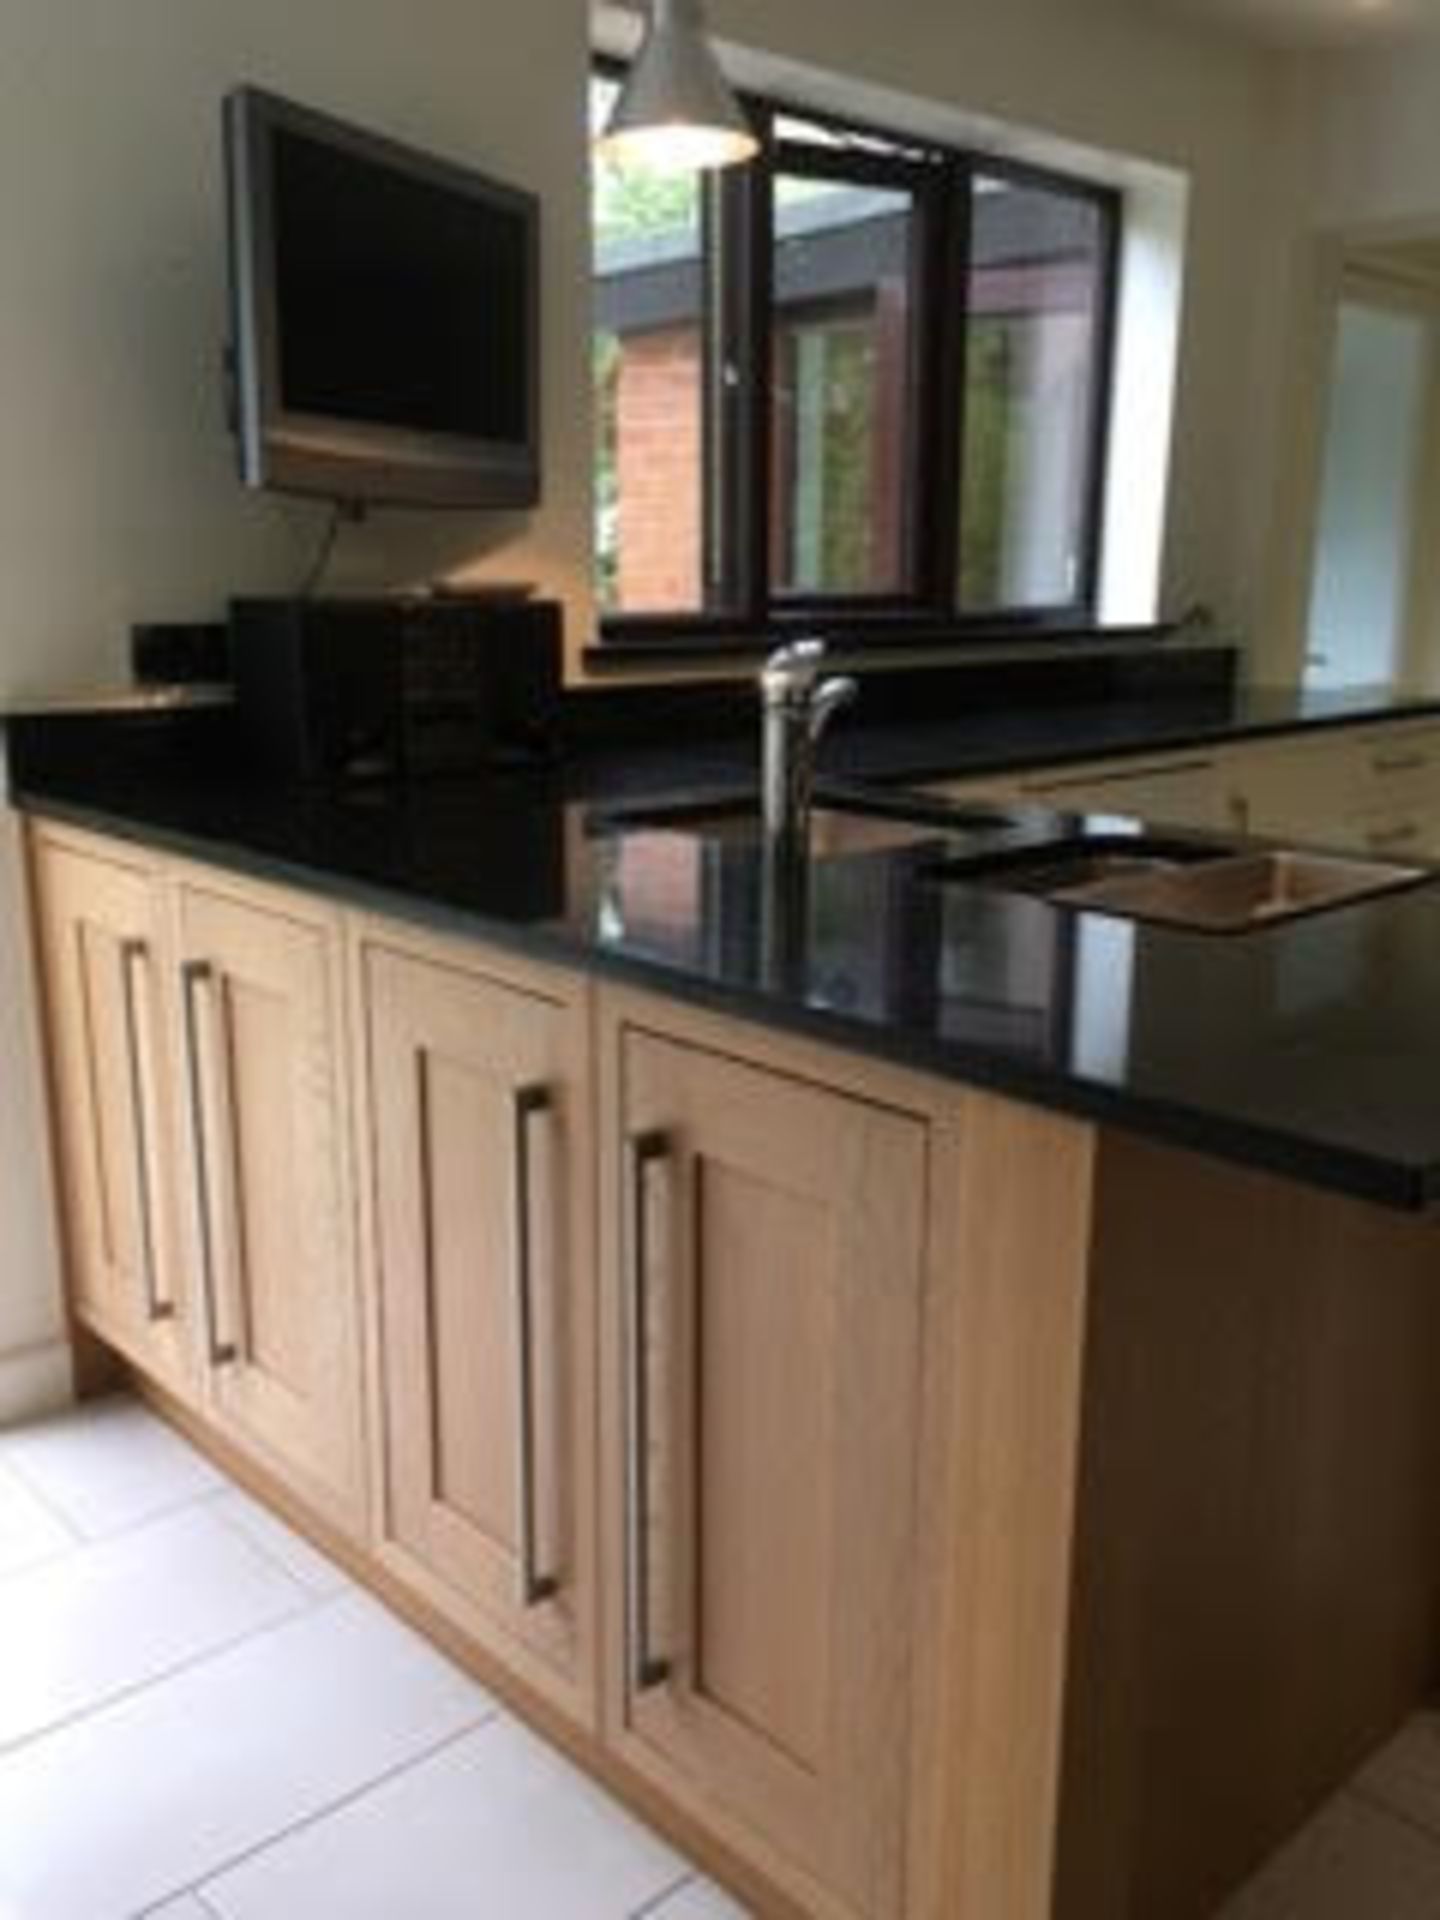 1 x Bespoke Solid Wood Fitted Kitchen With Granite Worktops - Pre-owned In Good Condtion - CL172 - - Image 13 of 22